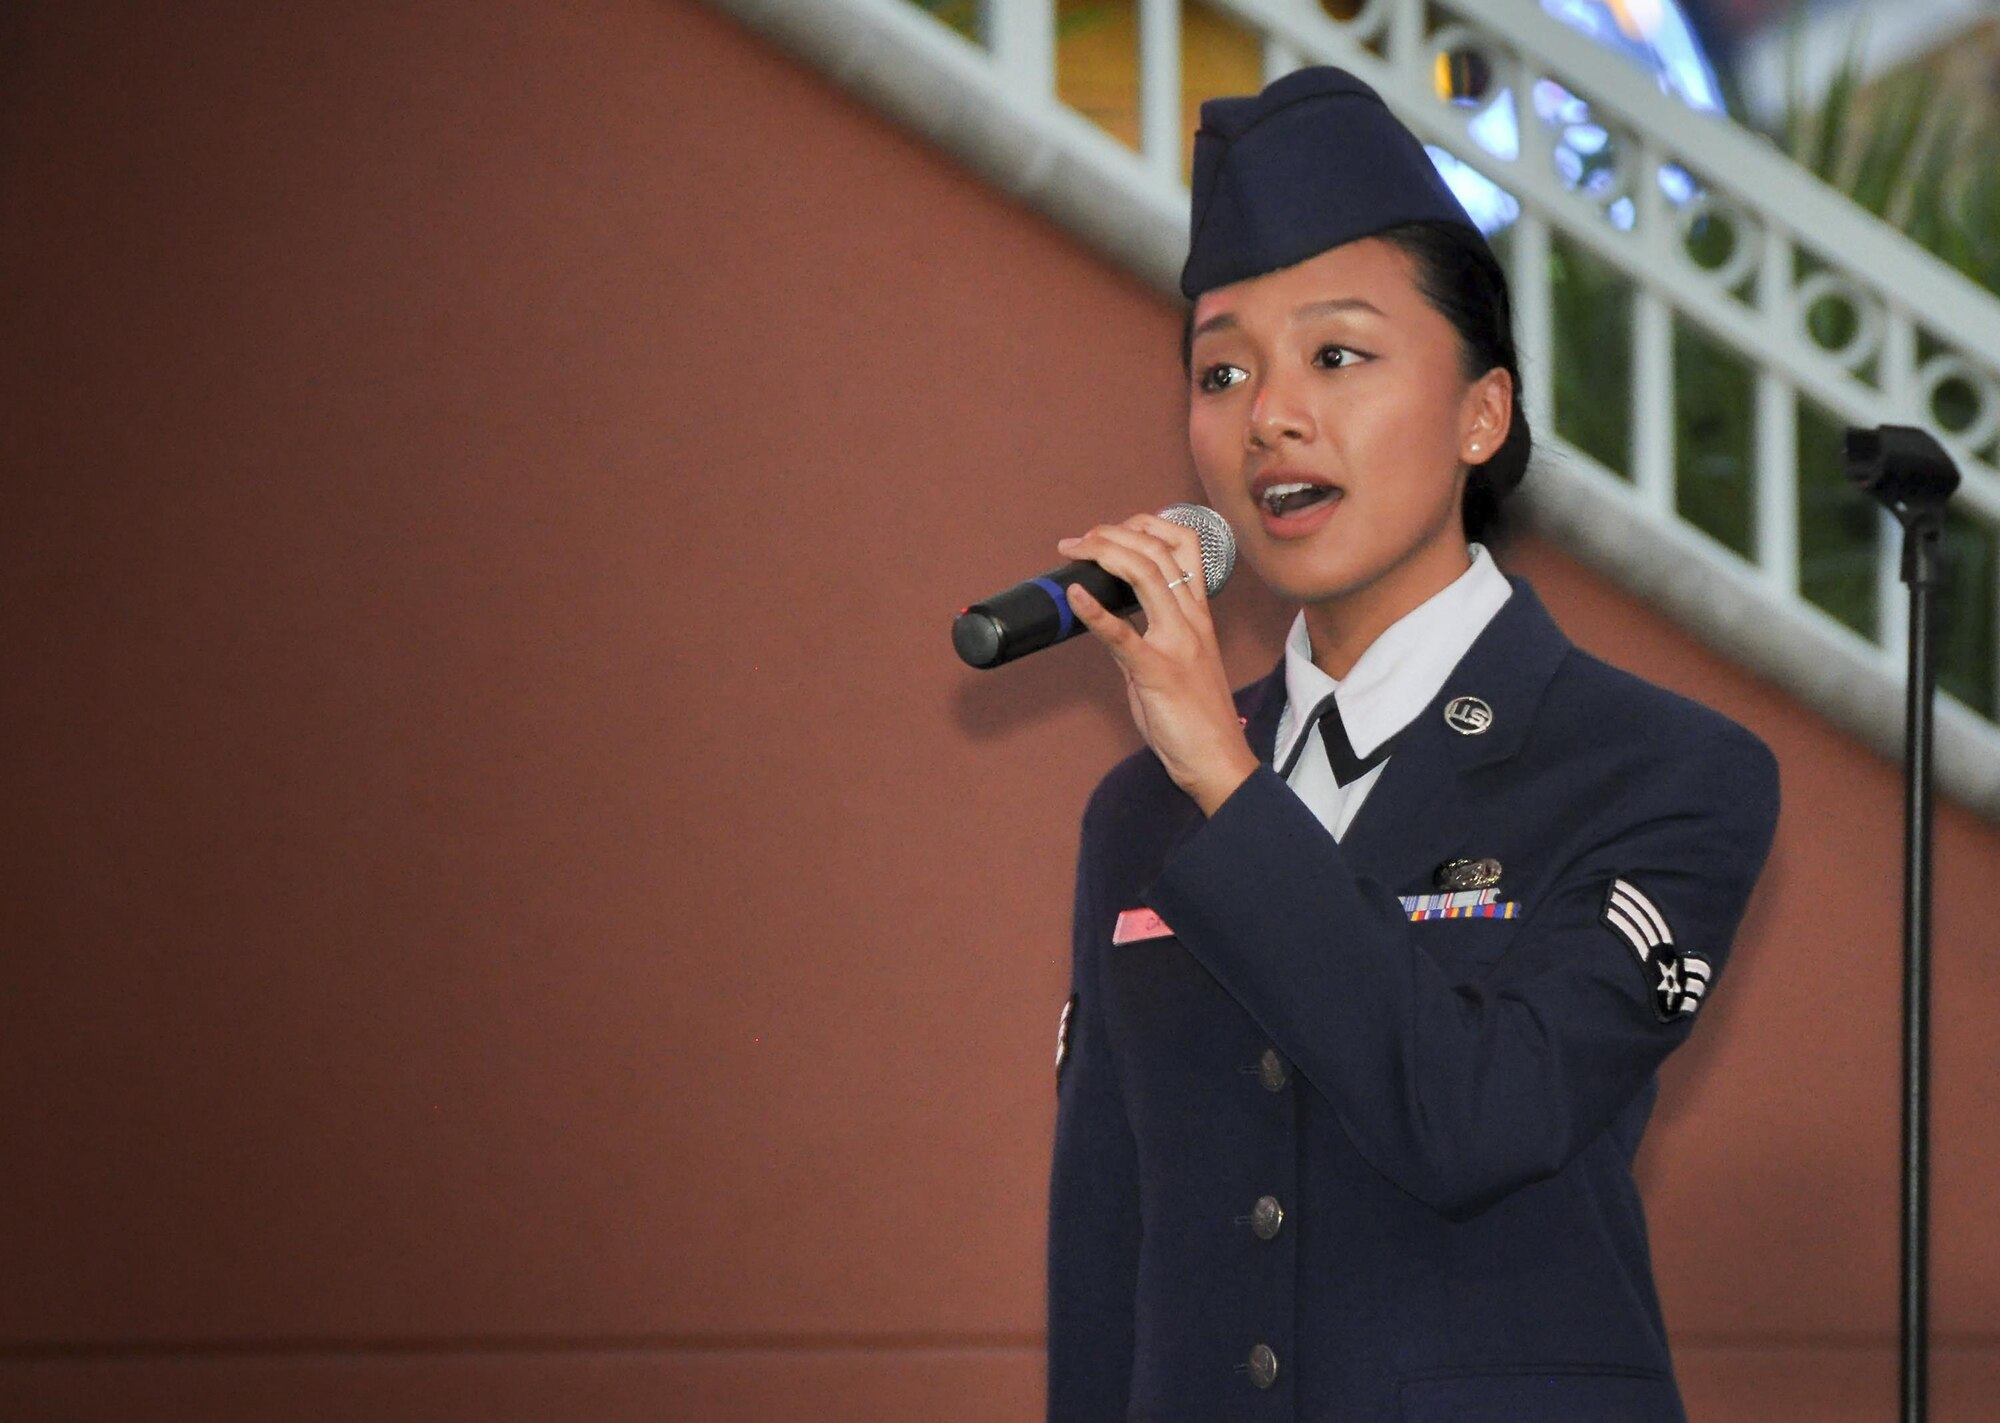 Senior Airman Christine David, 96th Aircraft Maintenance Squadron and former Tops in Blue singer, belts out the National Anthem during the Harborwalk Village’s Red, White and Blue Hero celebration Aug. 25 in Destin, Fla.  (U.S. Air Force photo/Lt. Col. James Wilson)  